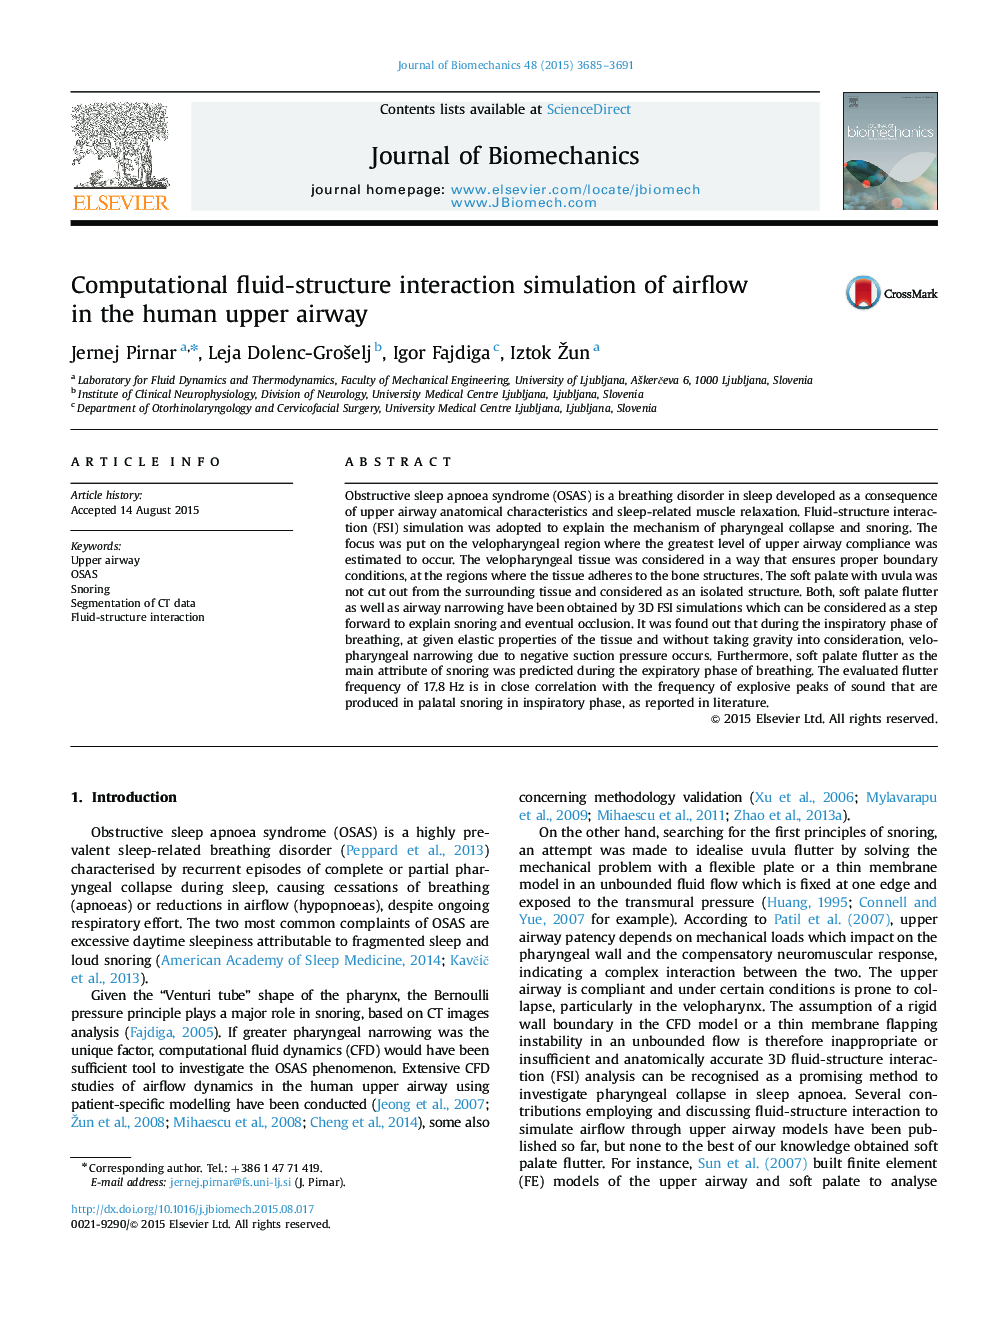 Computational fluid-structure interaction simulation of airflow in the human upper airway